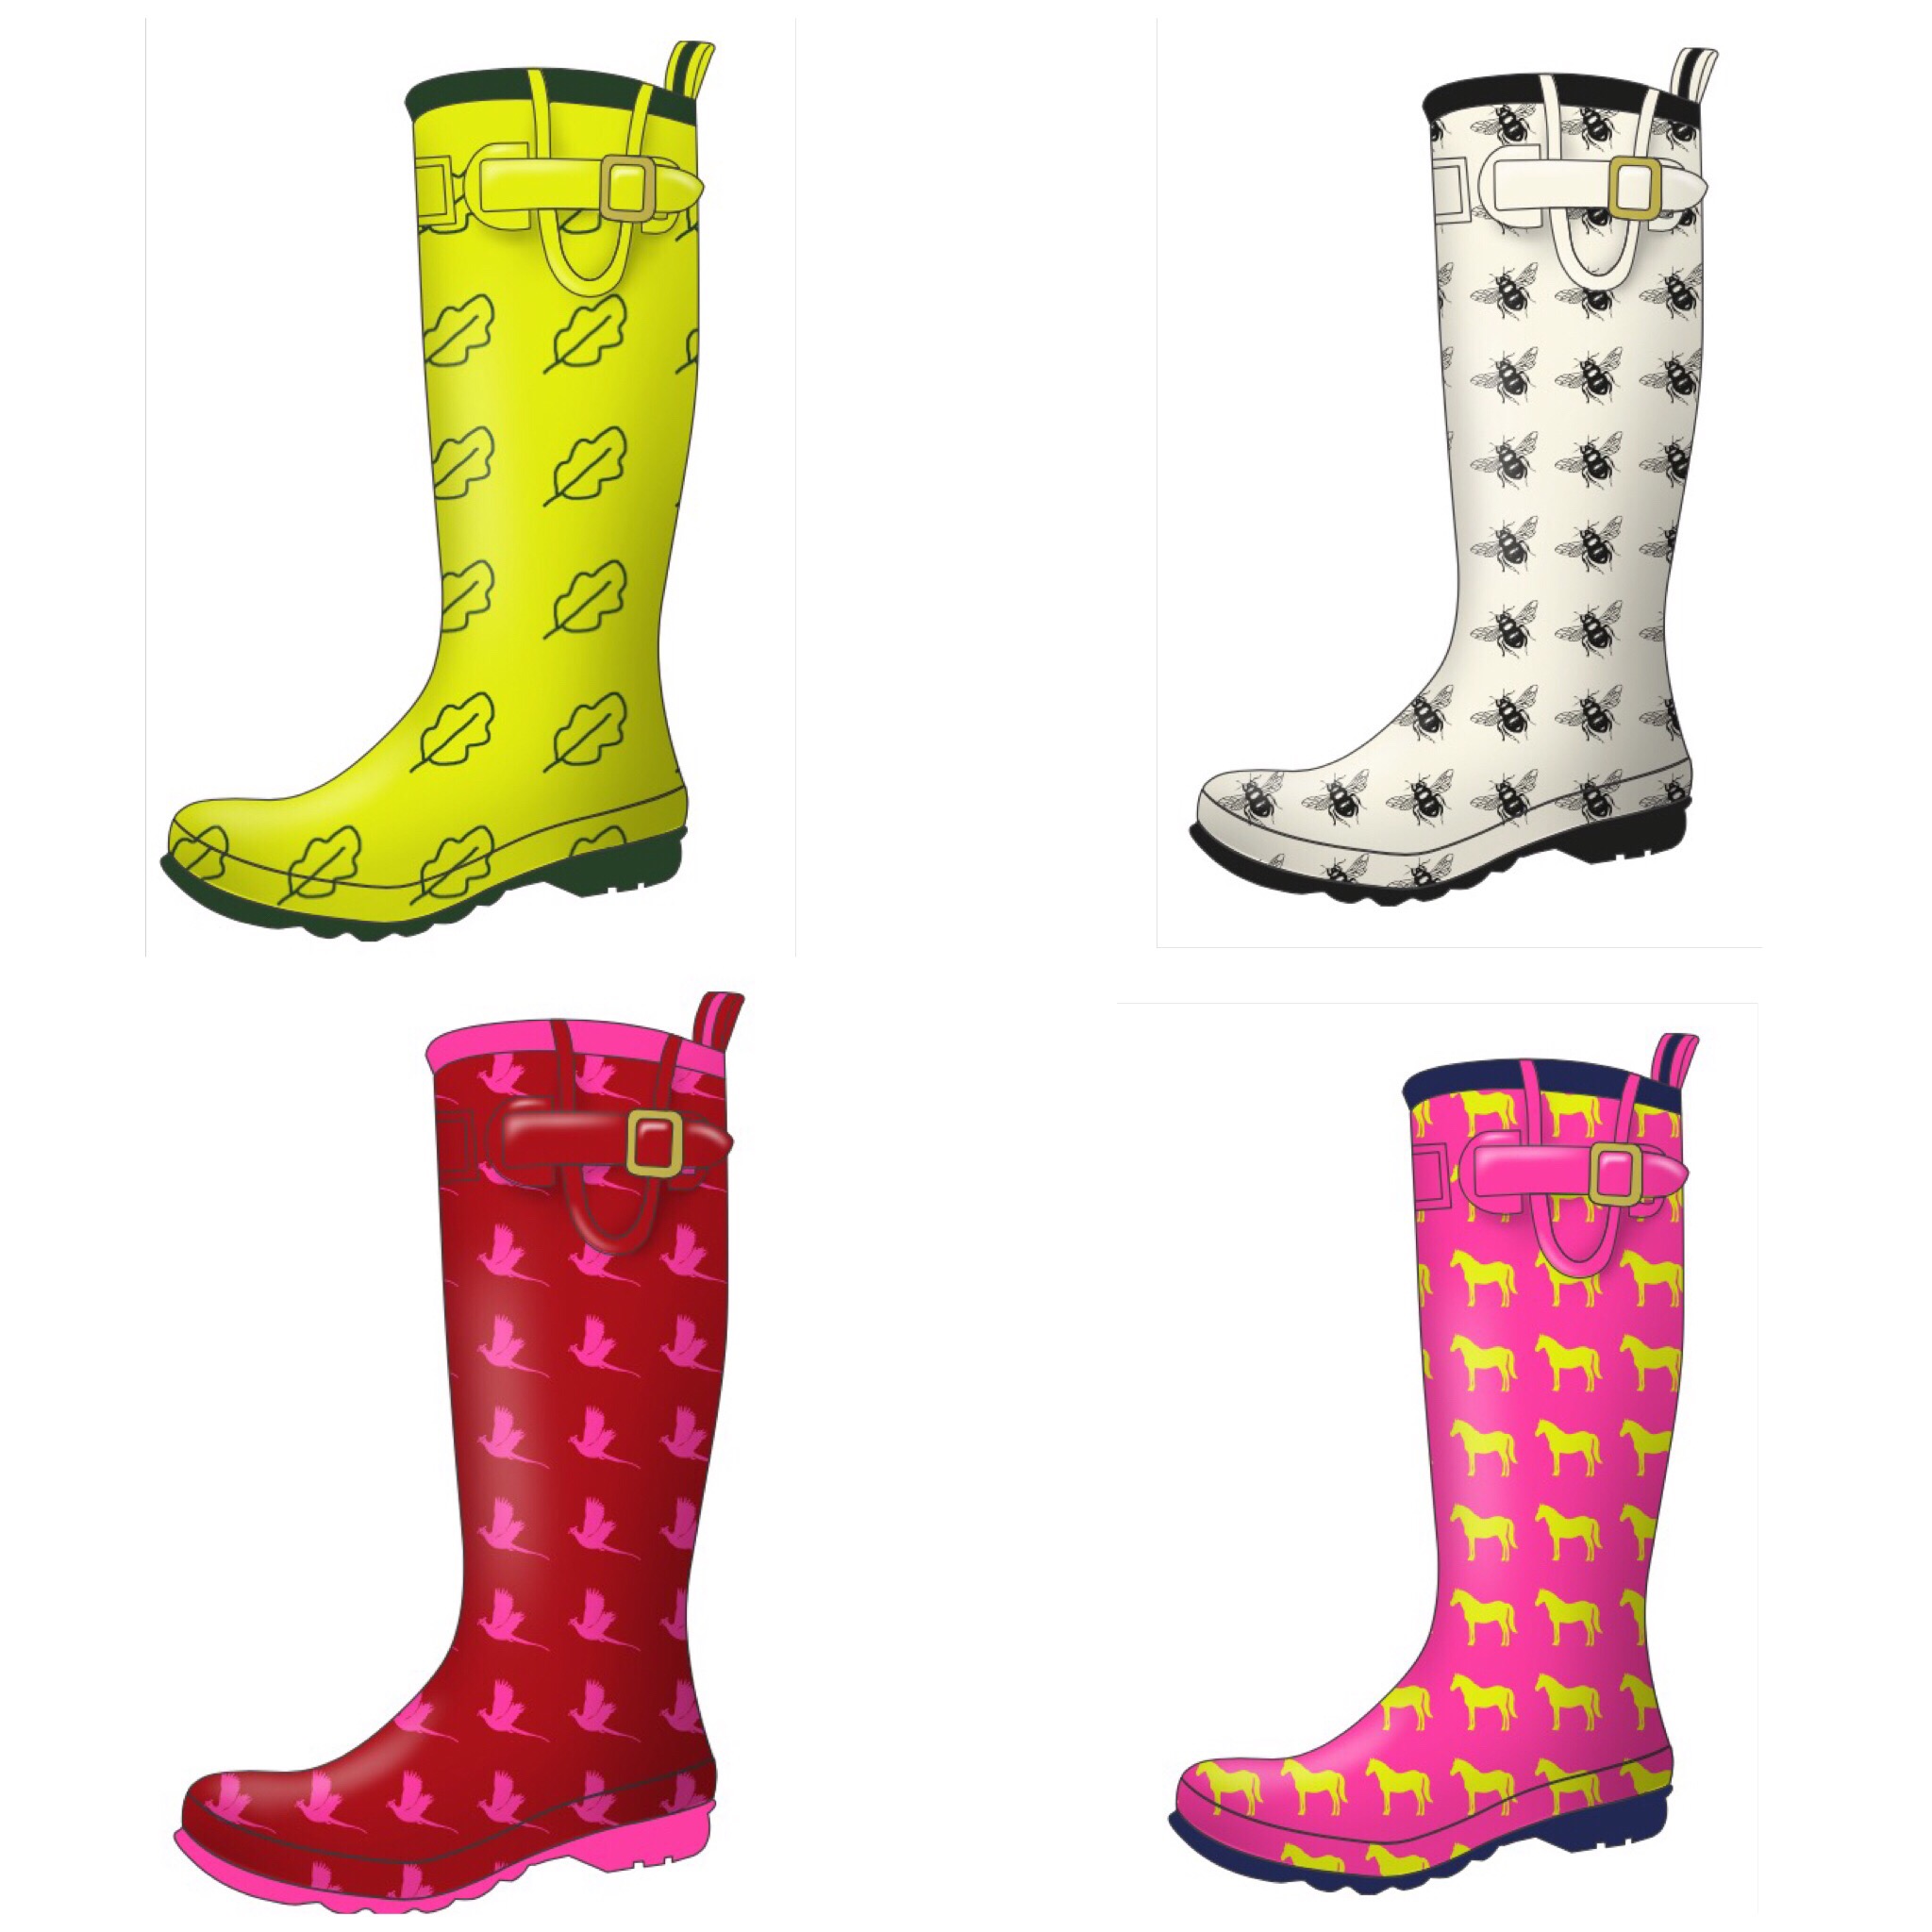 Joules wellies | competition | design your own | cocomamastyle